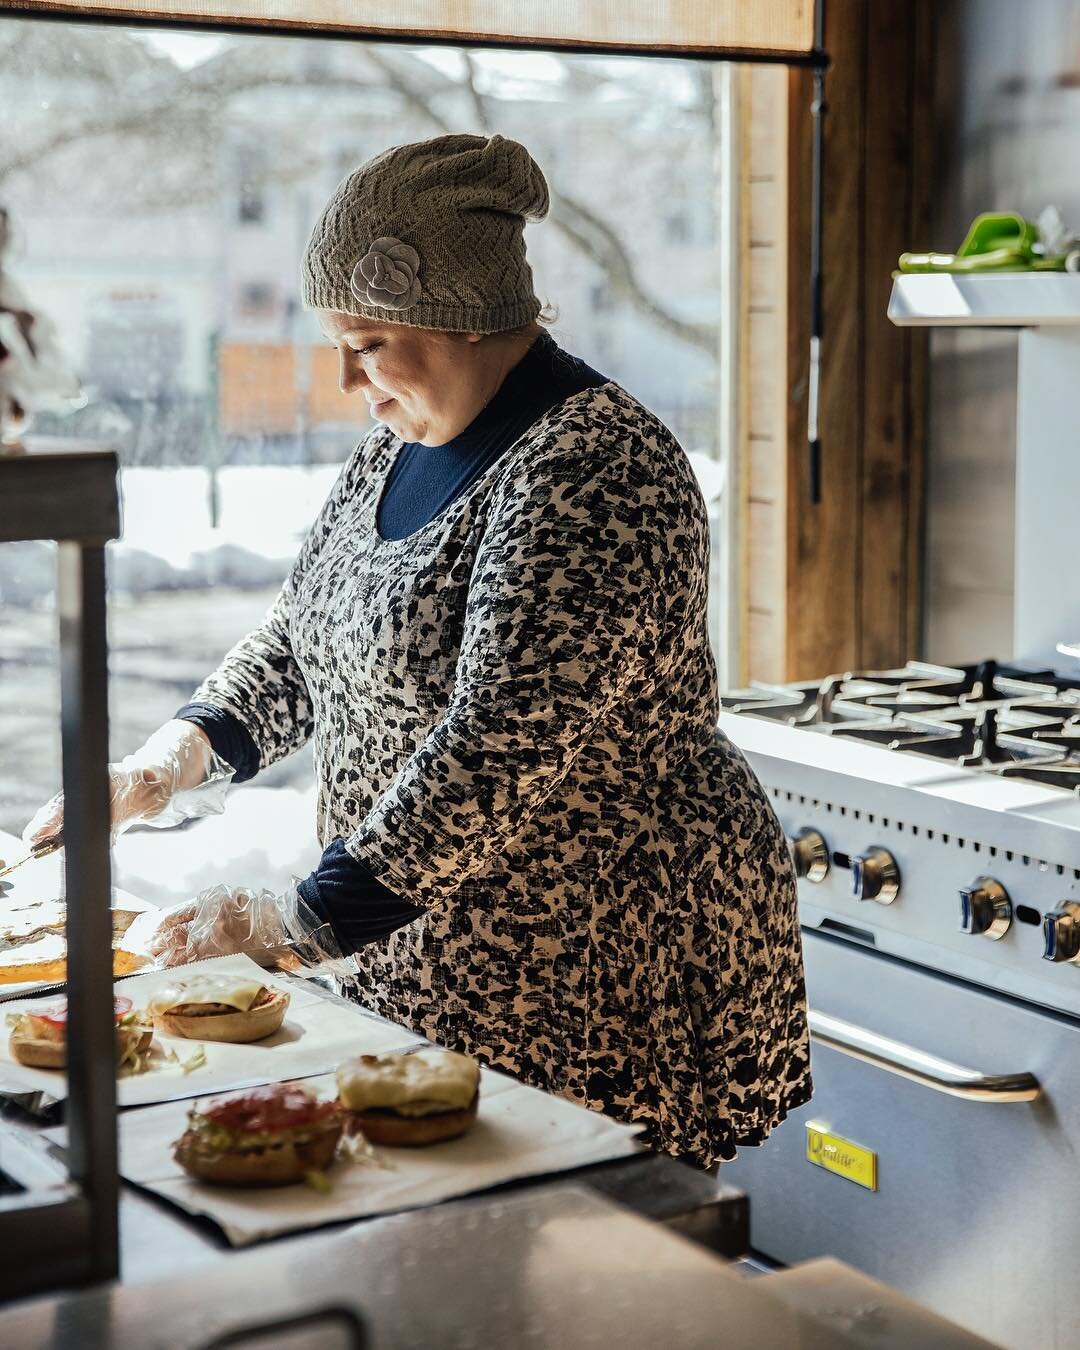 Tatyana, originally from Russia, and her husband, from Egypt, moved to Syracuse in 2004, and have worked passionately to build their halal butcher shop and deli (with Tatyana&rsquo;s delicious chicken shawarma, beef gyro, and goat curry) into a welco